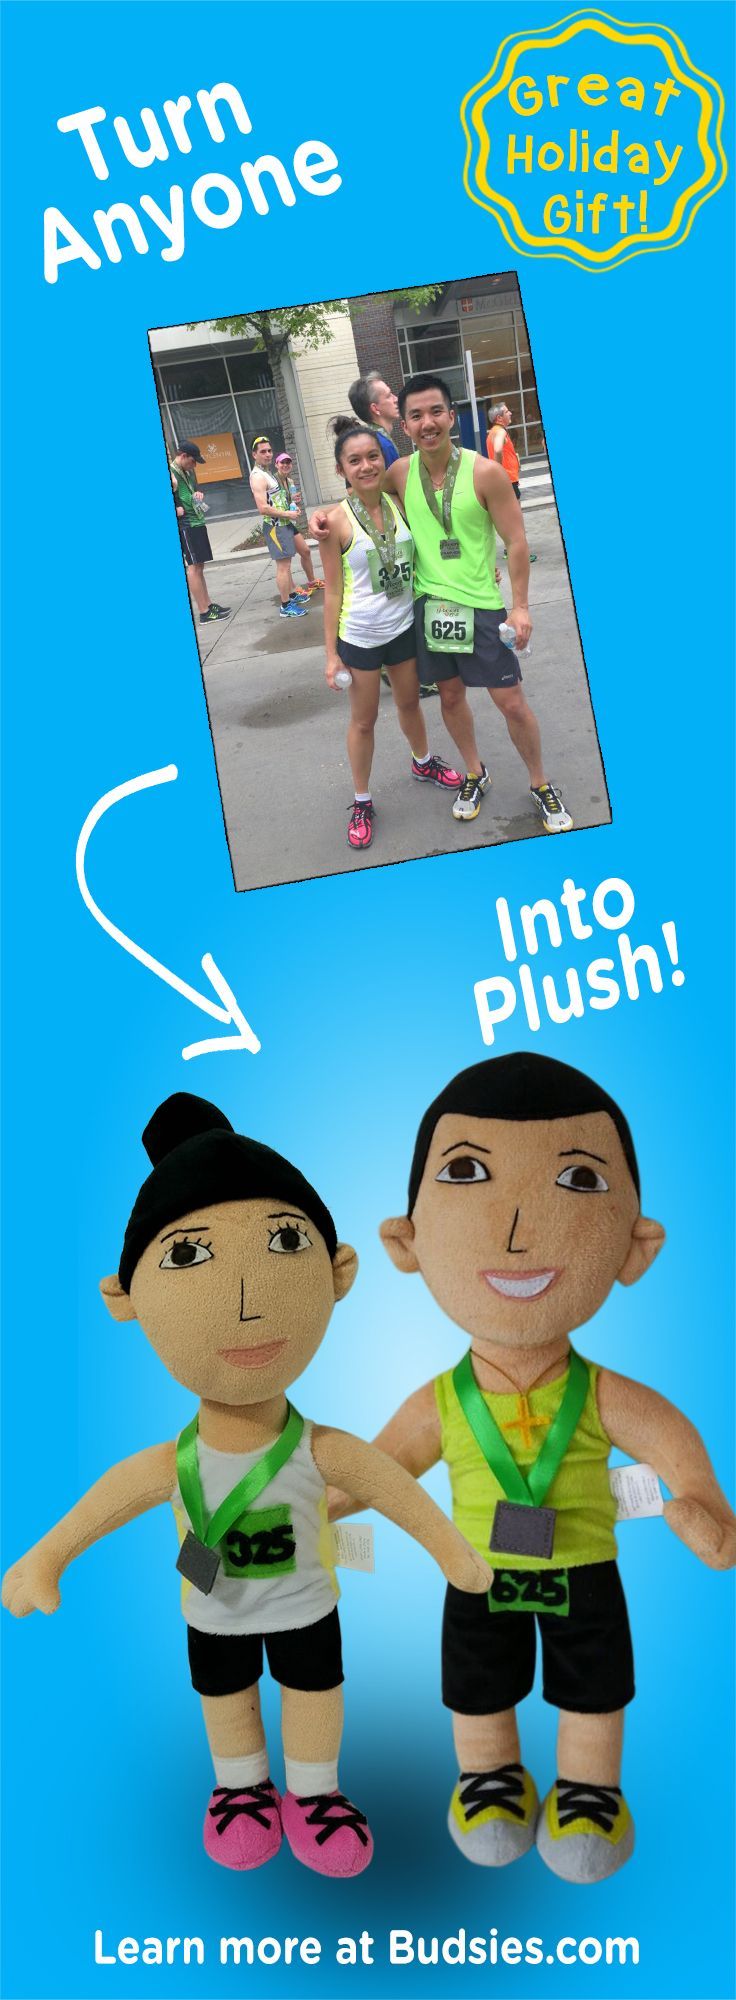 Check out this fun & unique gift for couples. Turn the two of you into a custom plush dolls! Super simple to order – learn more at